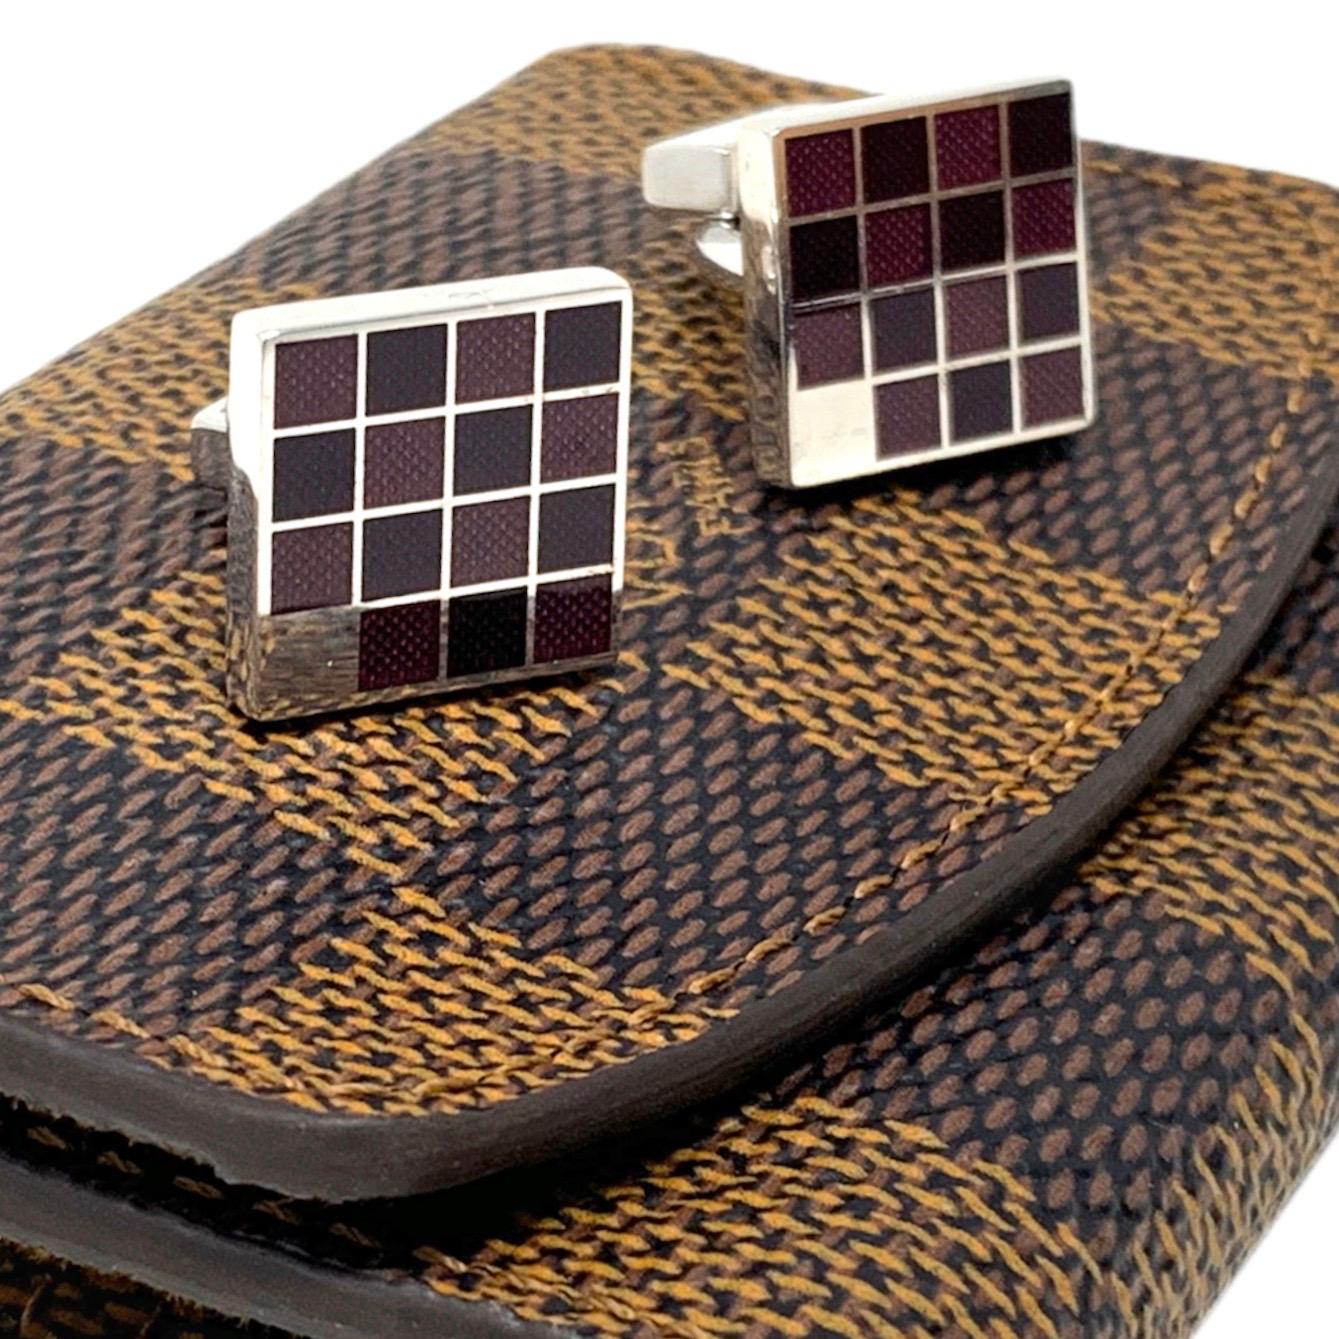 Classic Louis Vuitton silver-tone metal cufflinks with a square silhouette featuring multi-tone purple grid detailing. The set includes a Damier Ebene coated canvas carrying case, making these cufflinks easily portable and travel-ready.
Length: 0.5